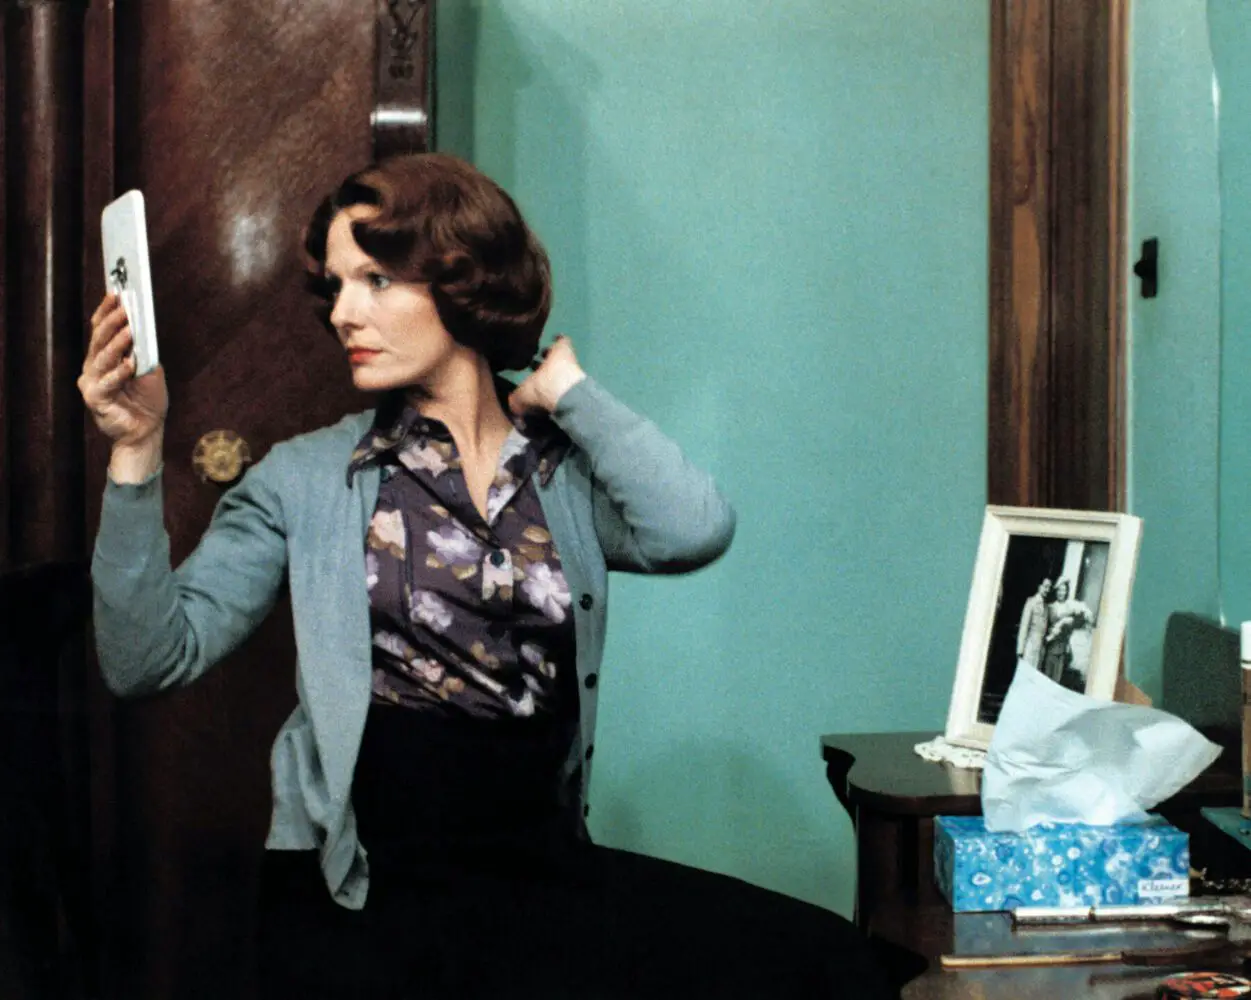 Image from Jeanne Dielman: The protagonist checks her makeup in a hand mirror.